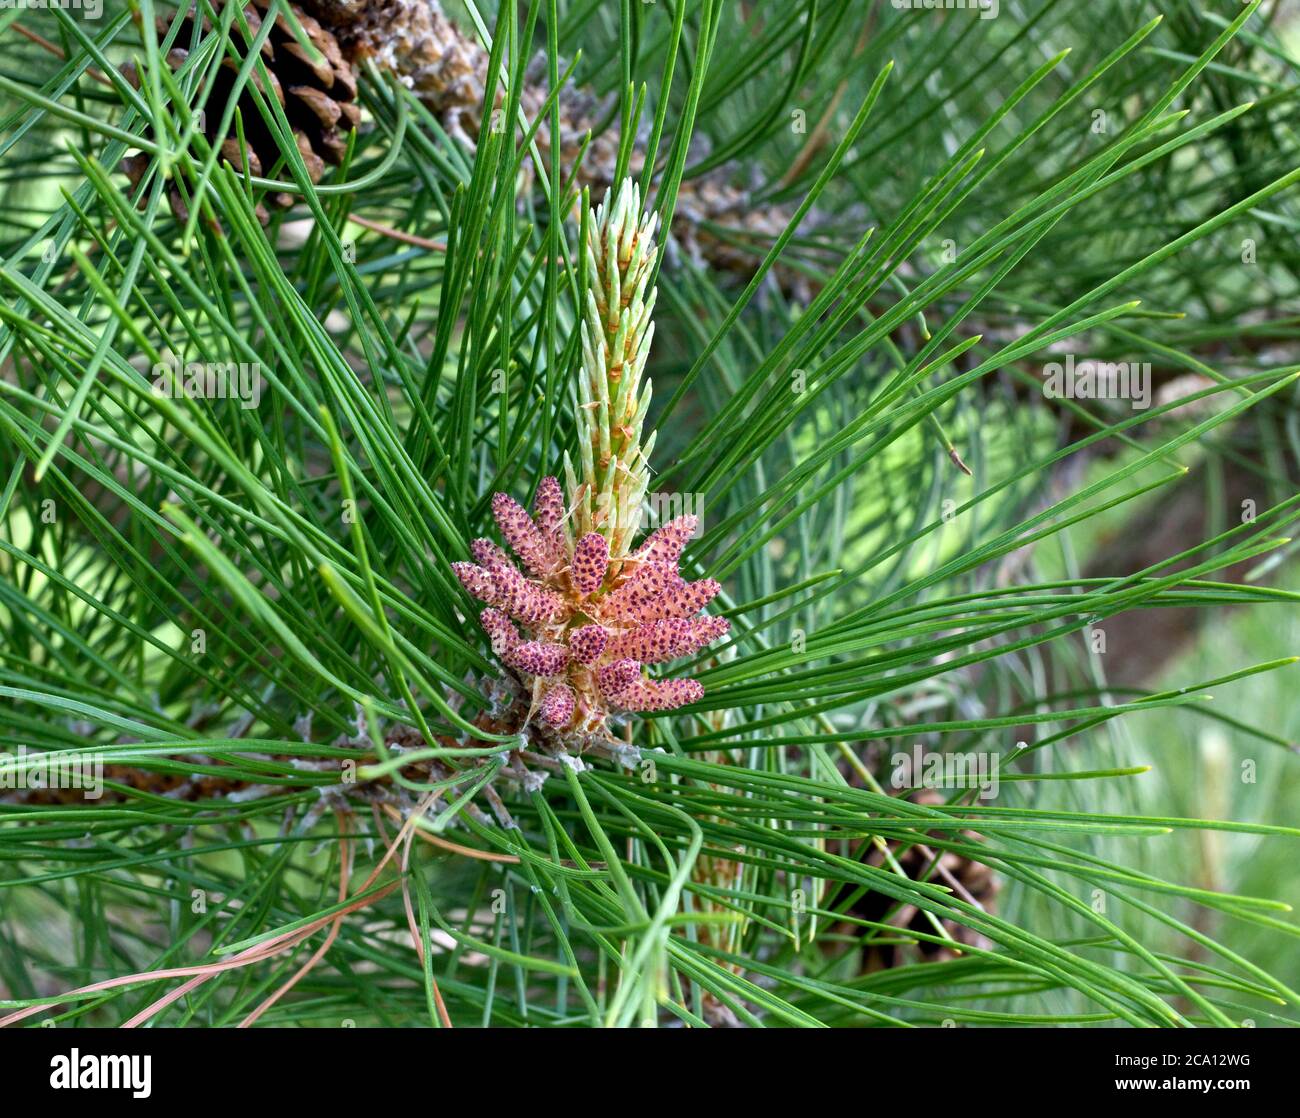 Male flower of Red Pine tree, Pinus resinosa, composed of pollen cones formed at the base of new shoot. Stock Photo